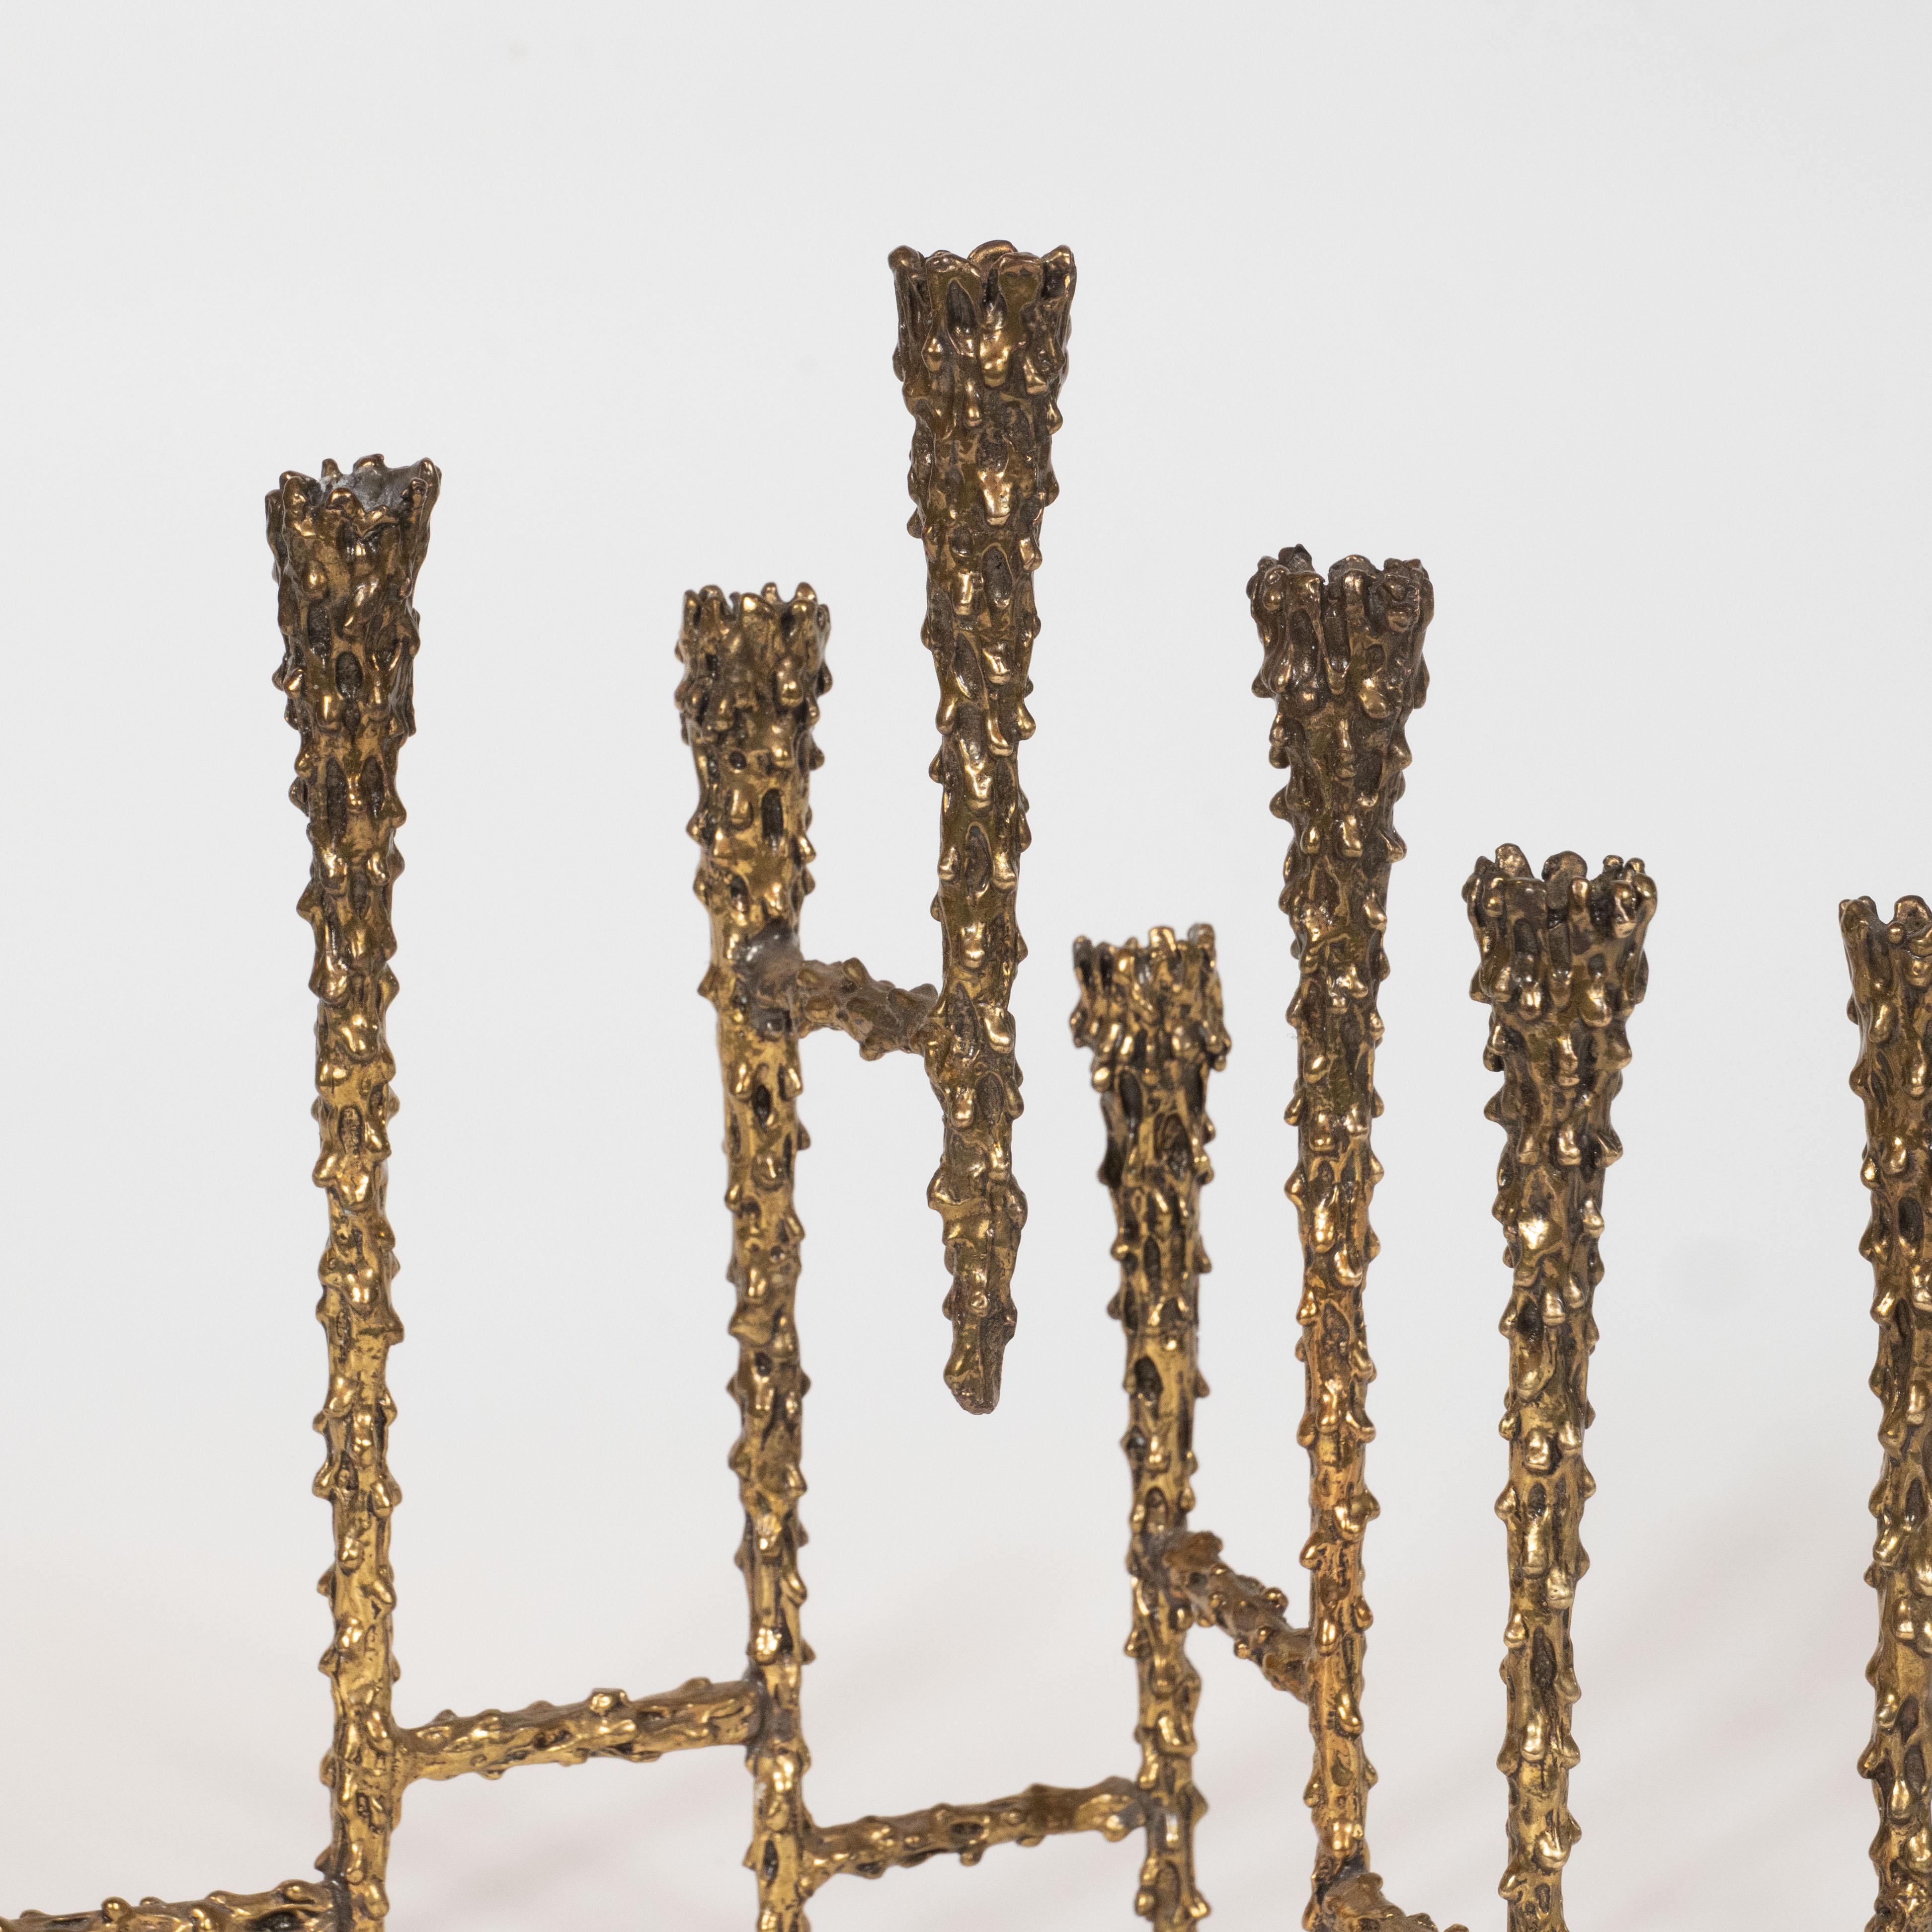 This refined menorah was realized in the United States, circa 1970. It features six tapered candlesticks connected by cylindrical embellishments all with heavily textural skin resembling melting wax. With its sophisticated brutalist aesthetic, this